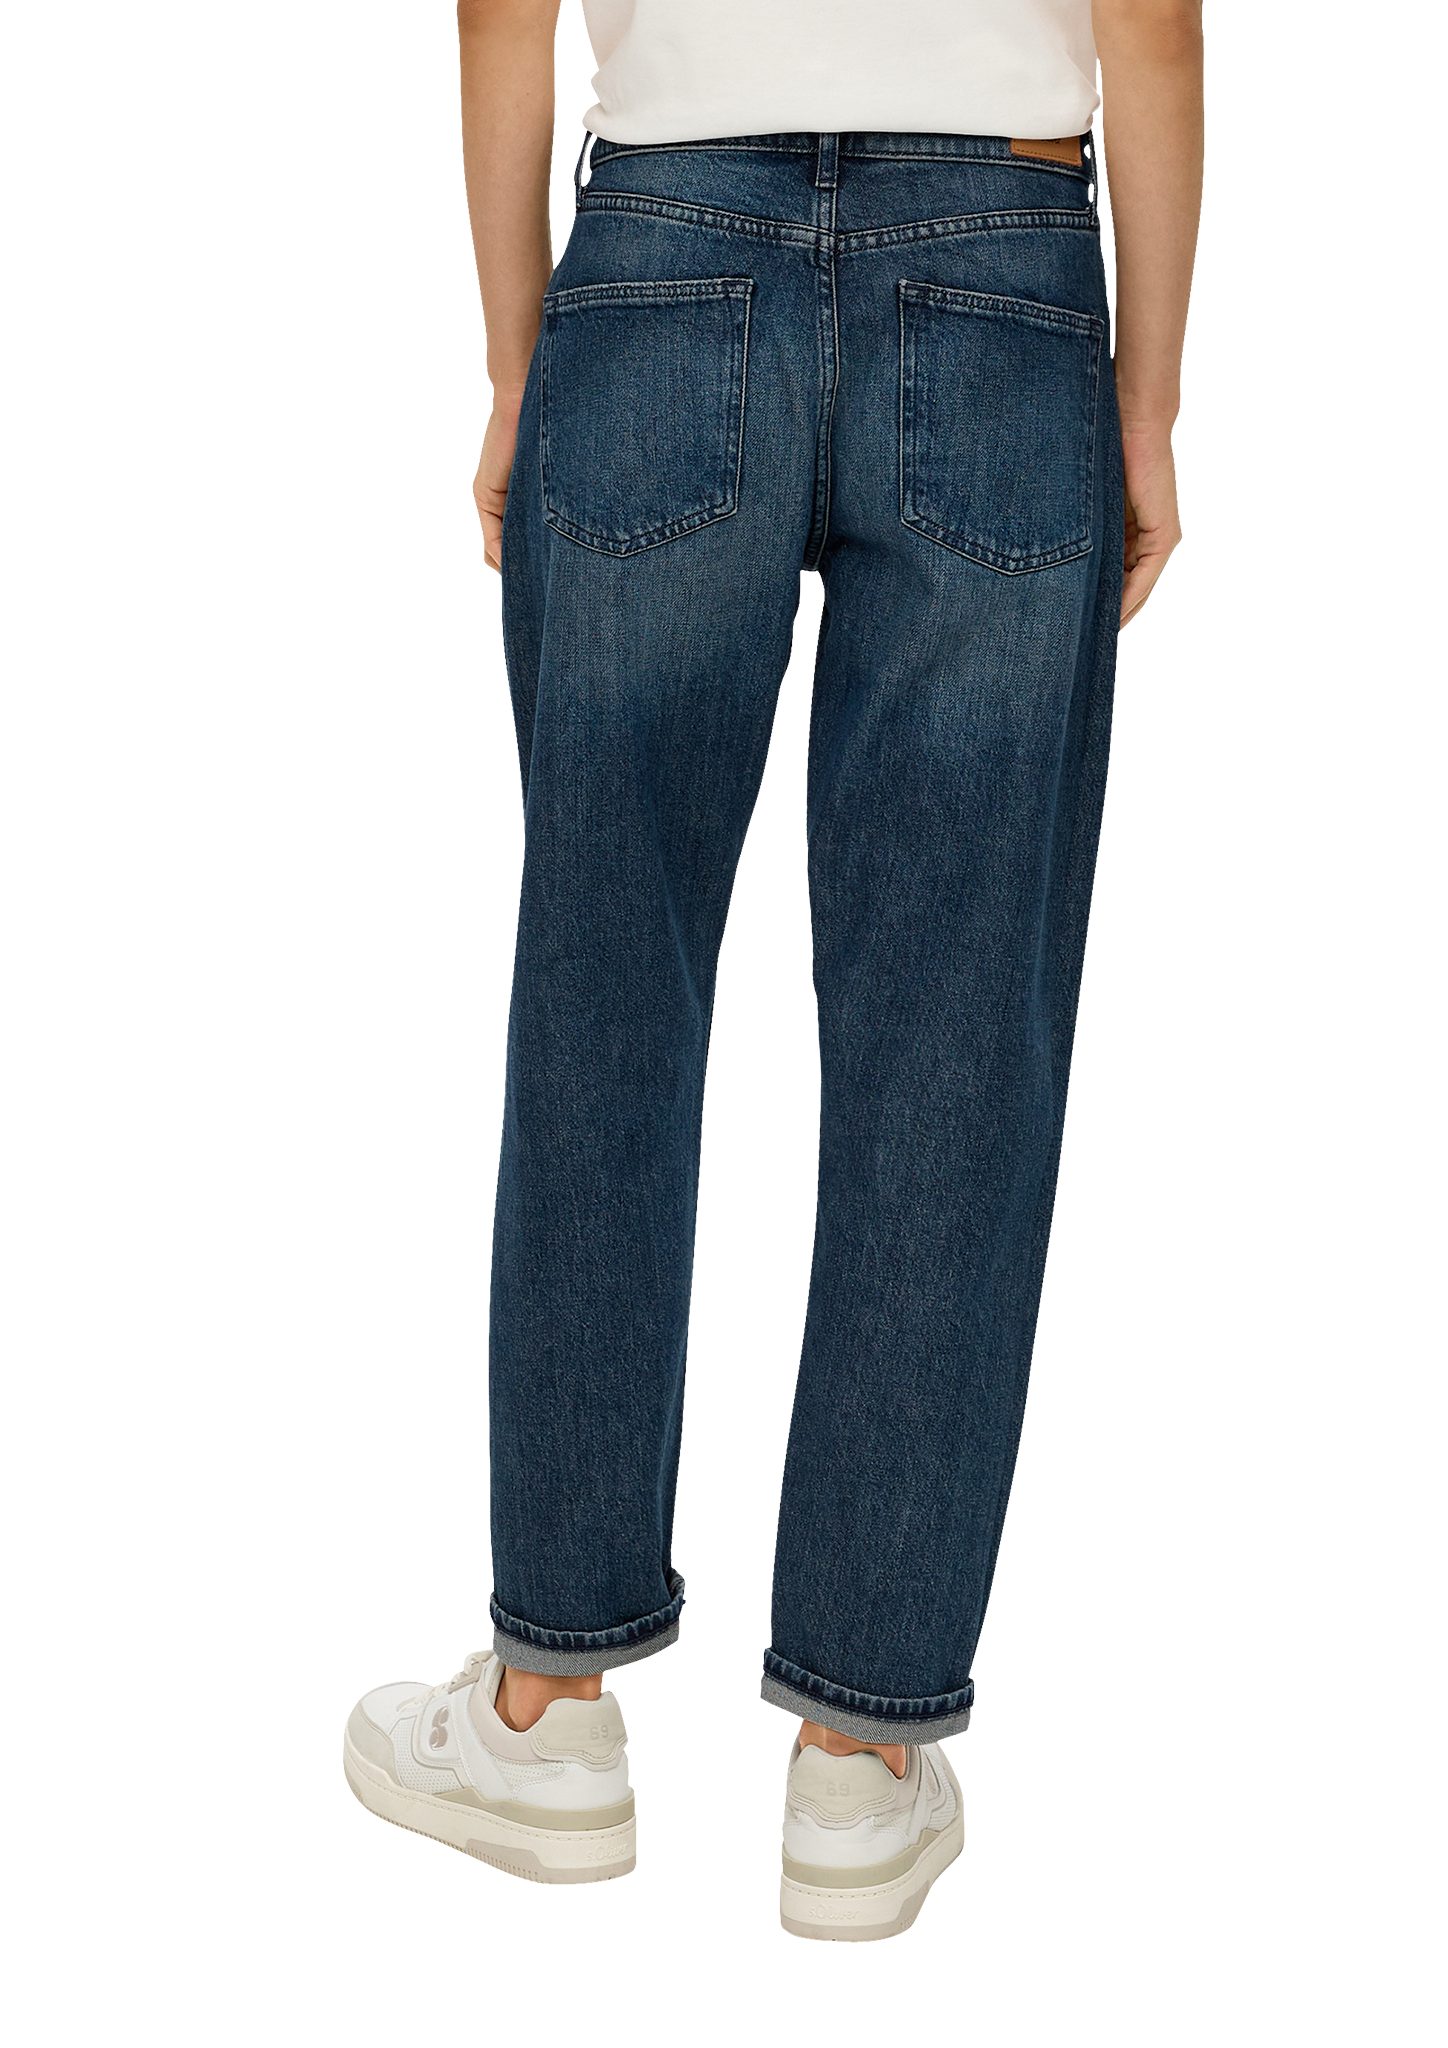 Rise Leg Mid / s.Oliver Franciz 7/8-Jeans Relaxed / Fit Tapered Ankle-Jeans Label-Patch / Waschung,